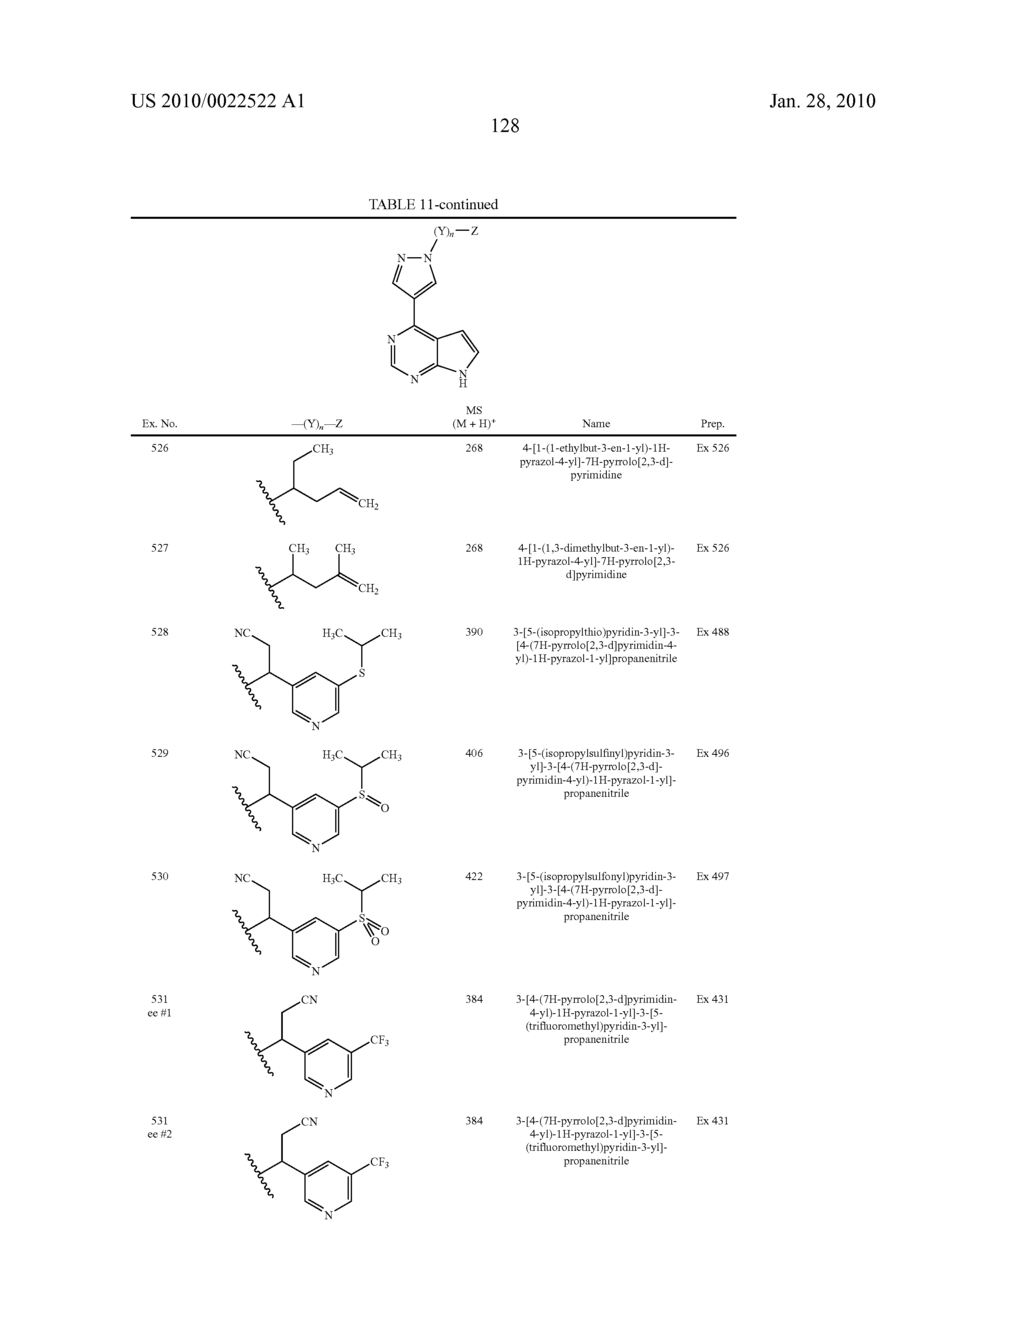 HETEROARYL SUBSTITUTED PYRROLO[2,3-b]PYRIDINES AND PYRROLO[2,3-b]PYRIMIDINES AS JANUS KINASE INHIBITORS - diagram, schematic, and image 129